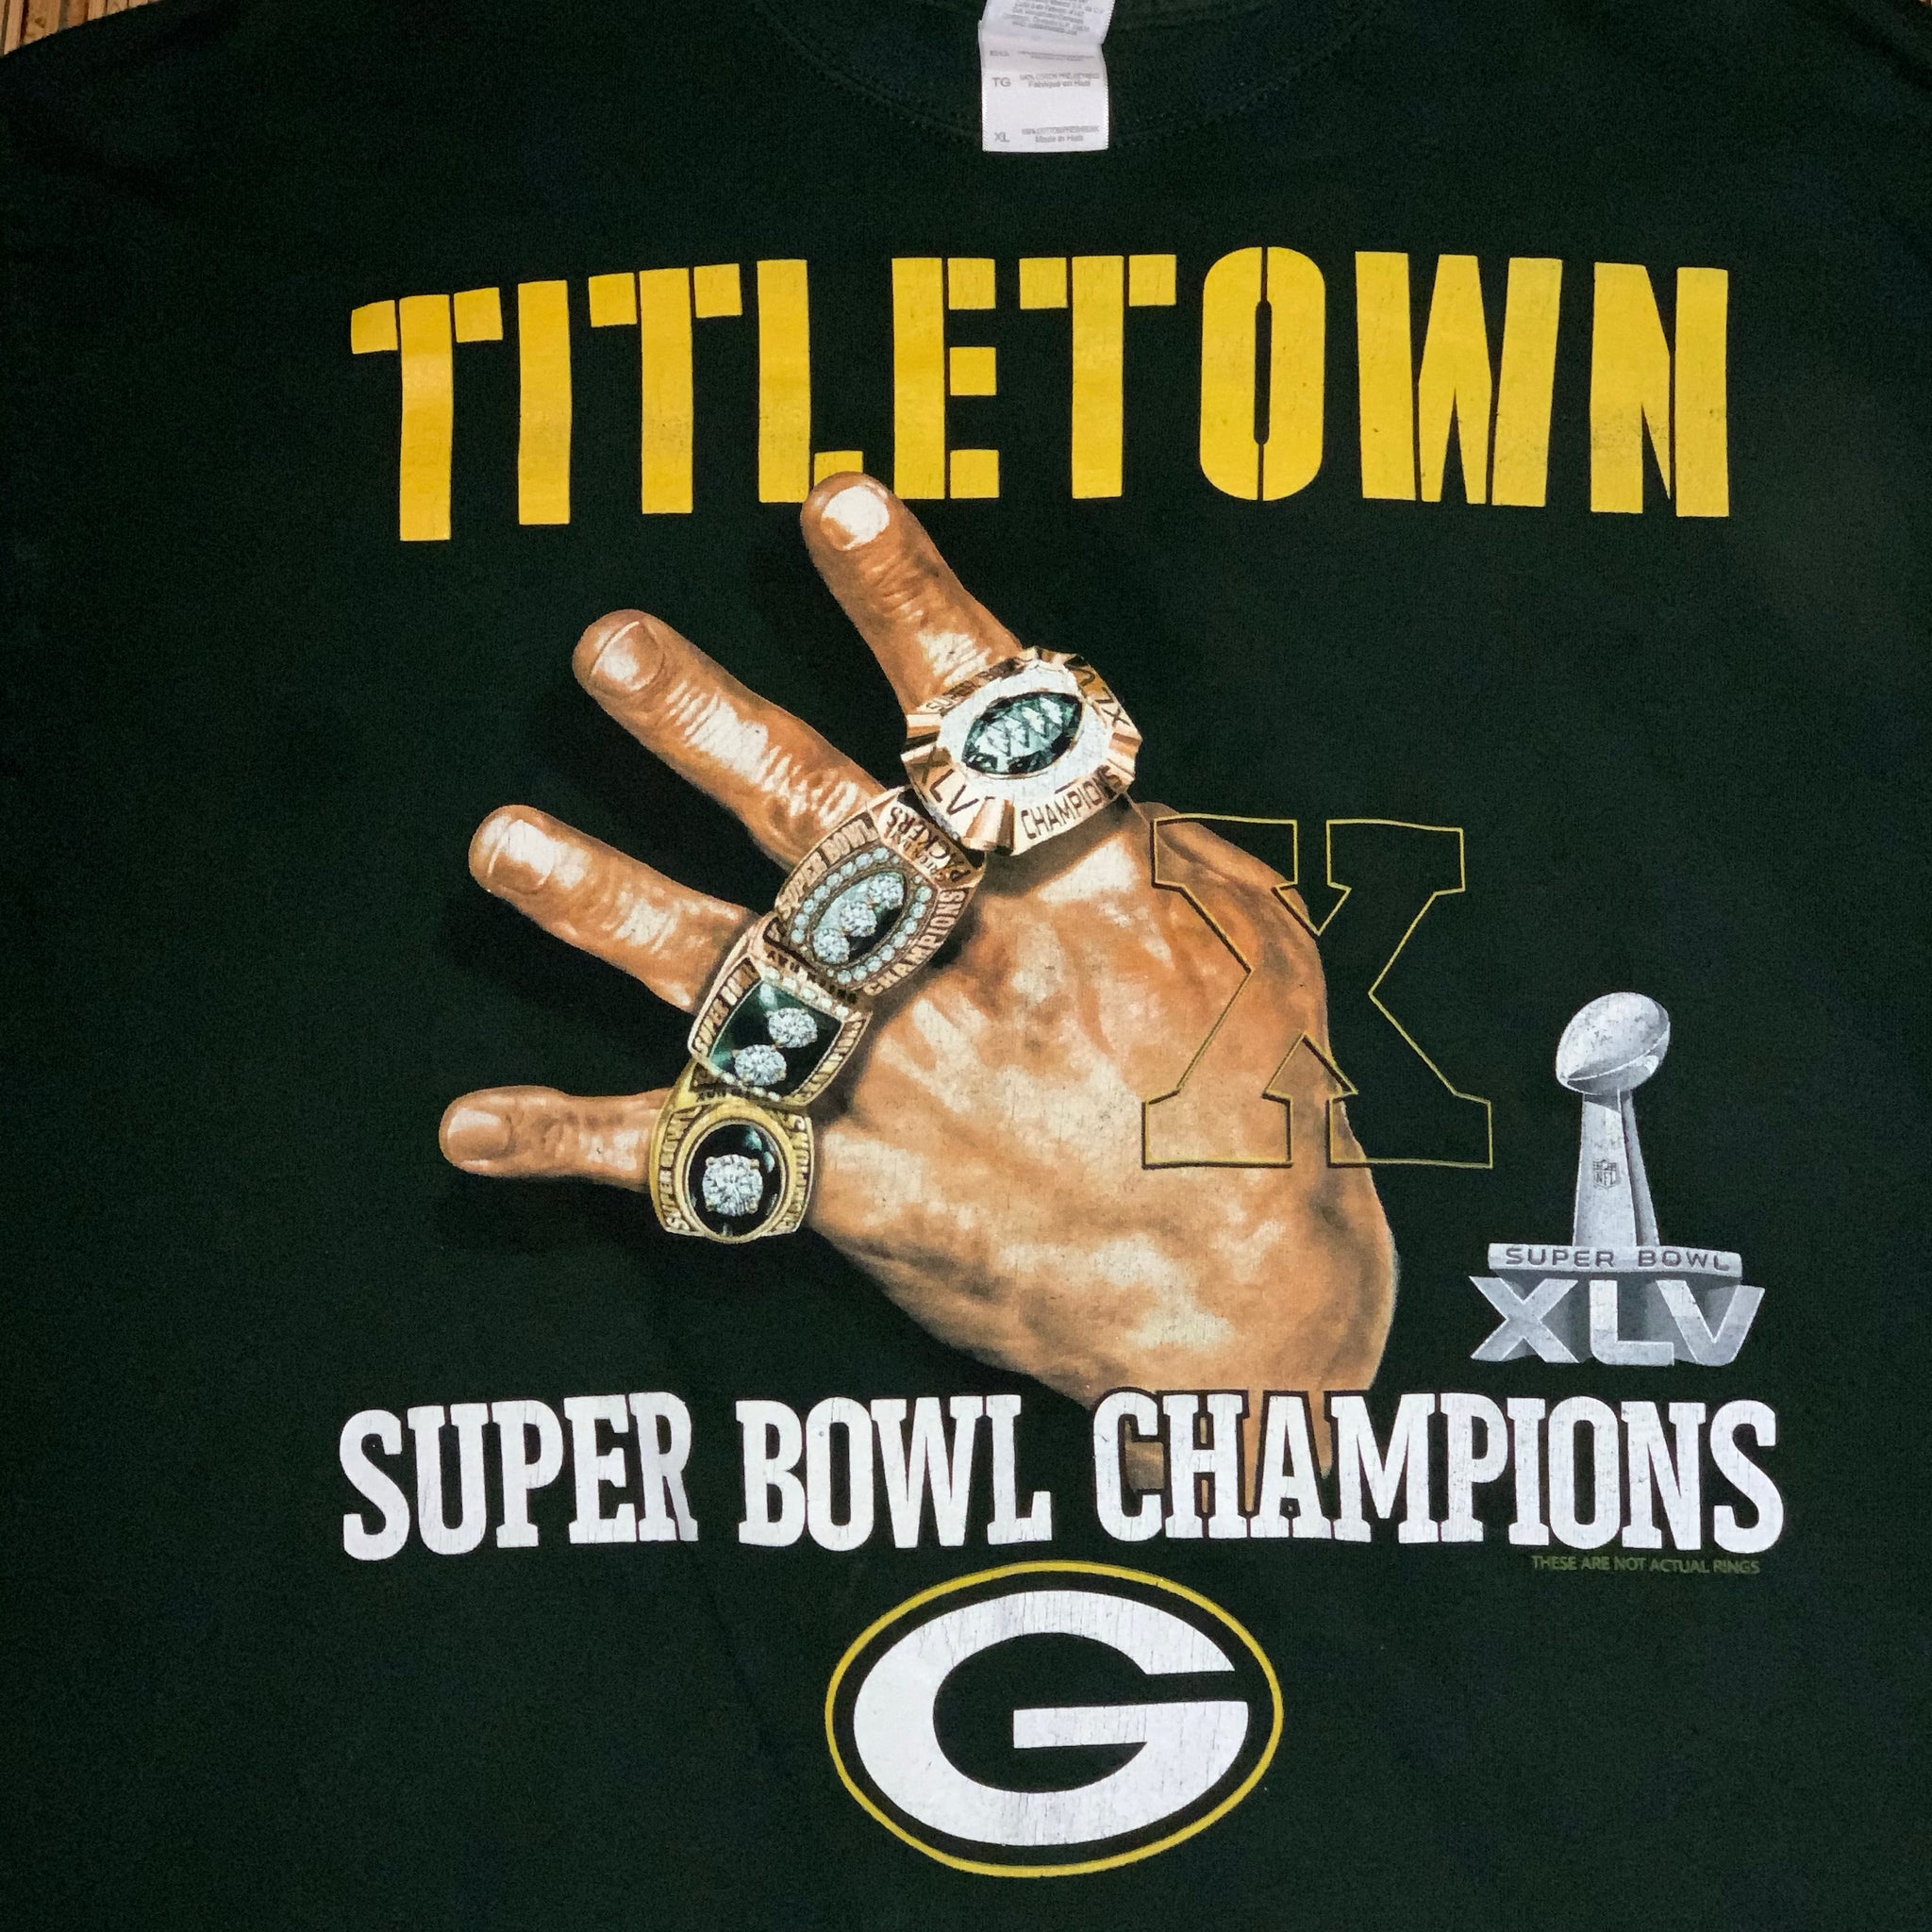 Super Bowl rings: A photo gallery from I through LV